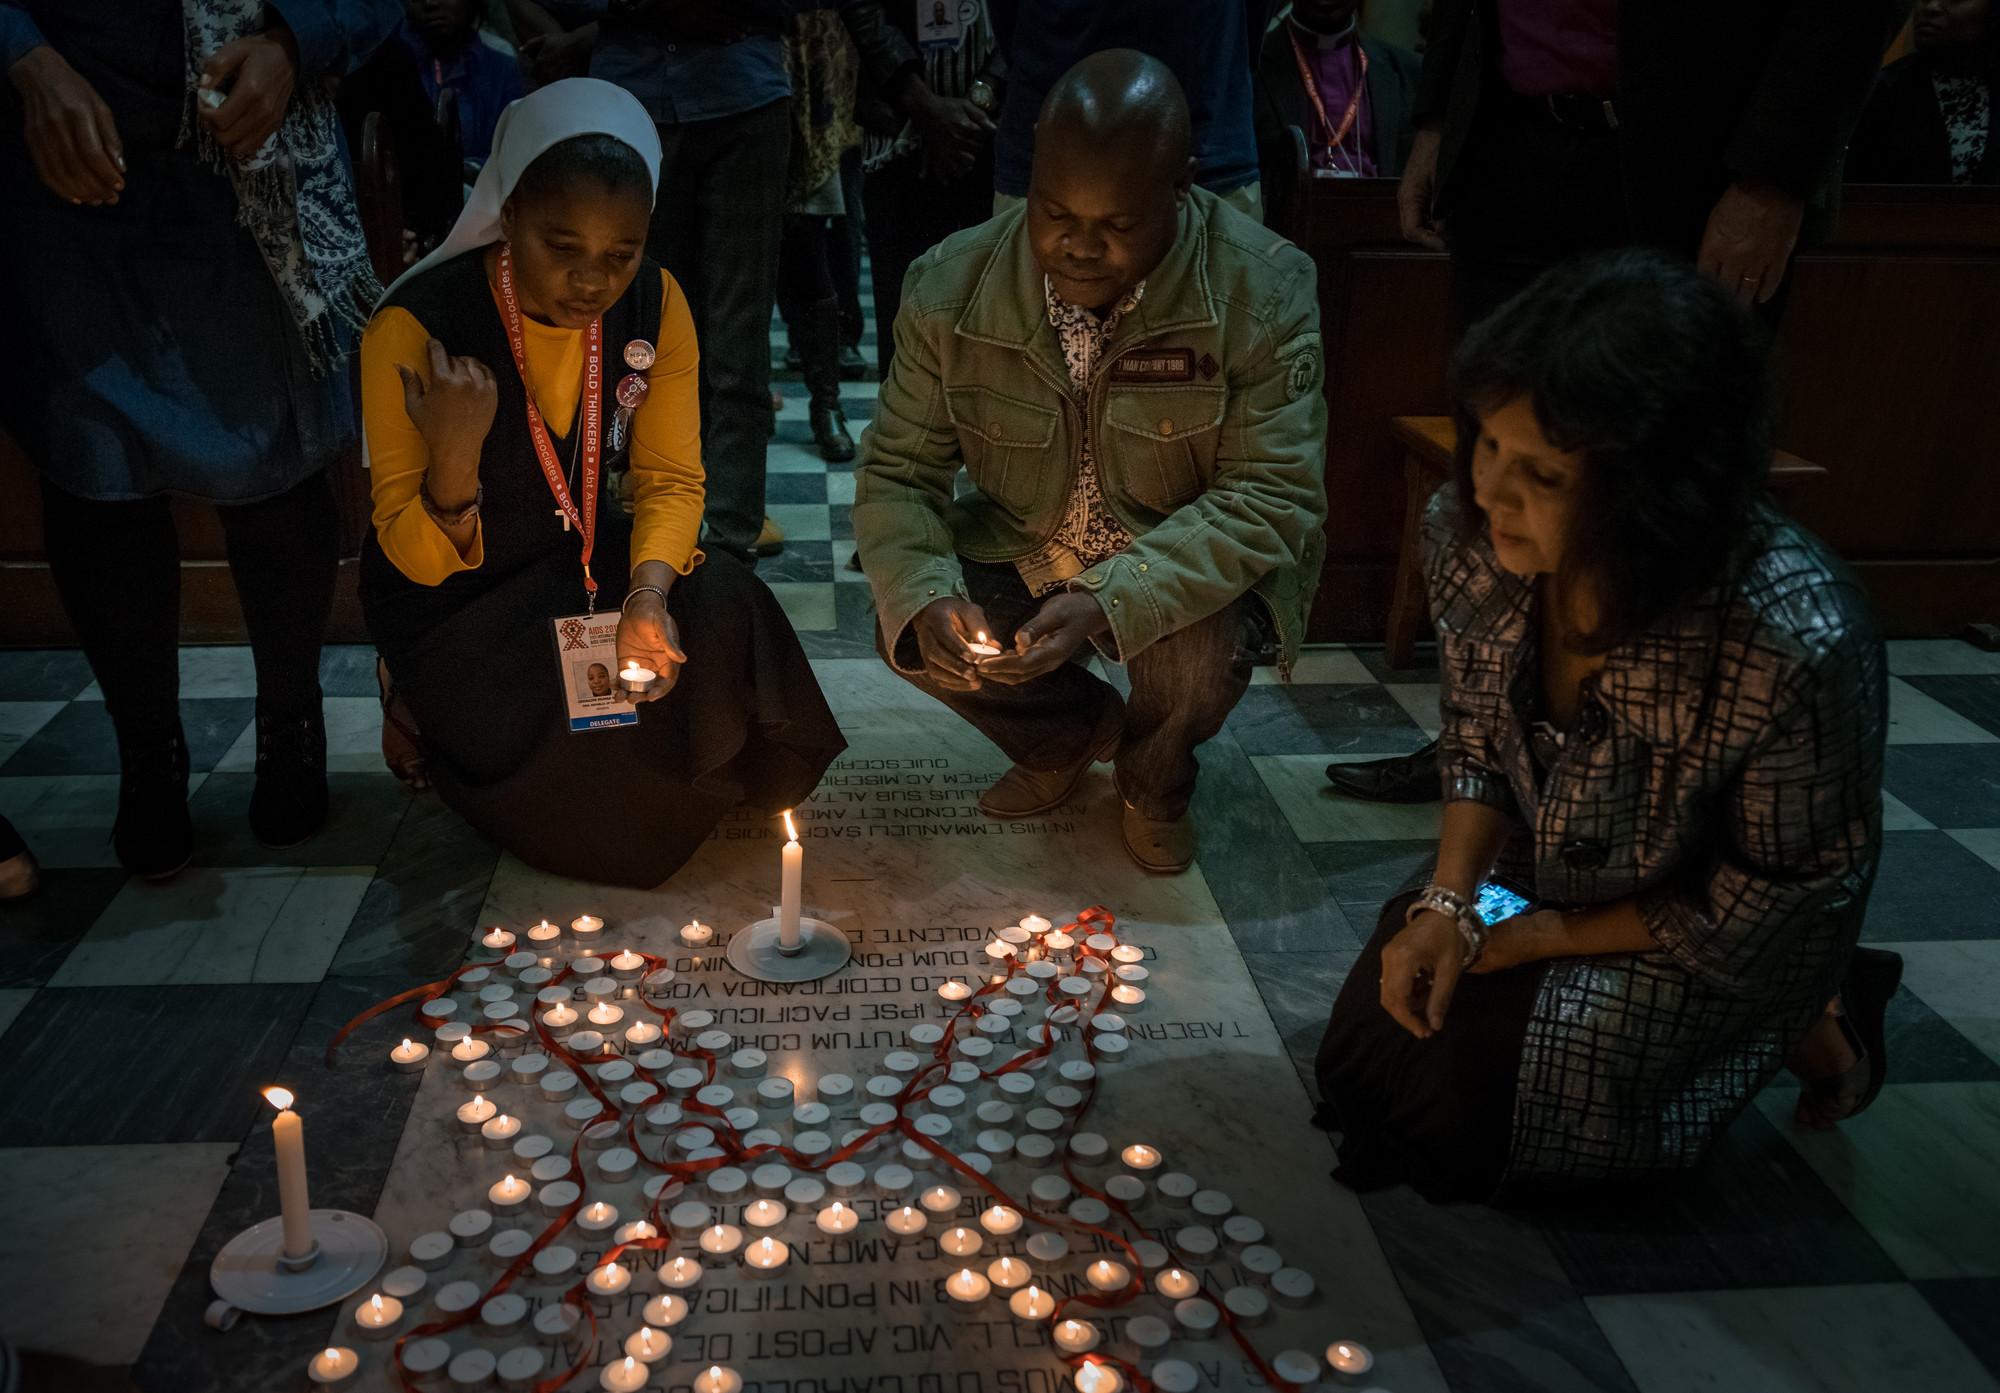 Participants light candles during a July 19 interfaith prayer service, held at the Roman Catholic Emmanuel Cathedral in Durban, South Africa, during the 2016 International AIDS Conference